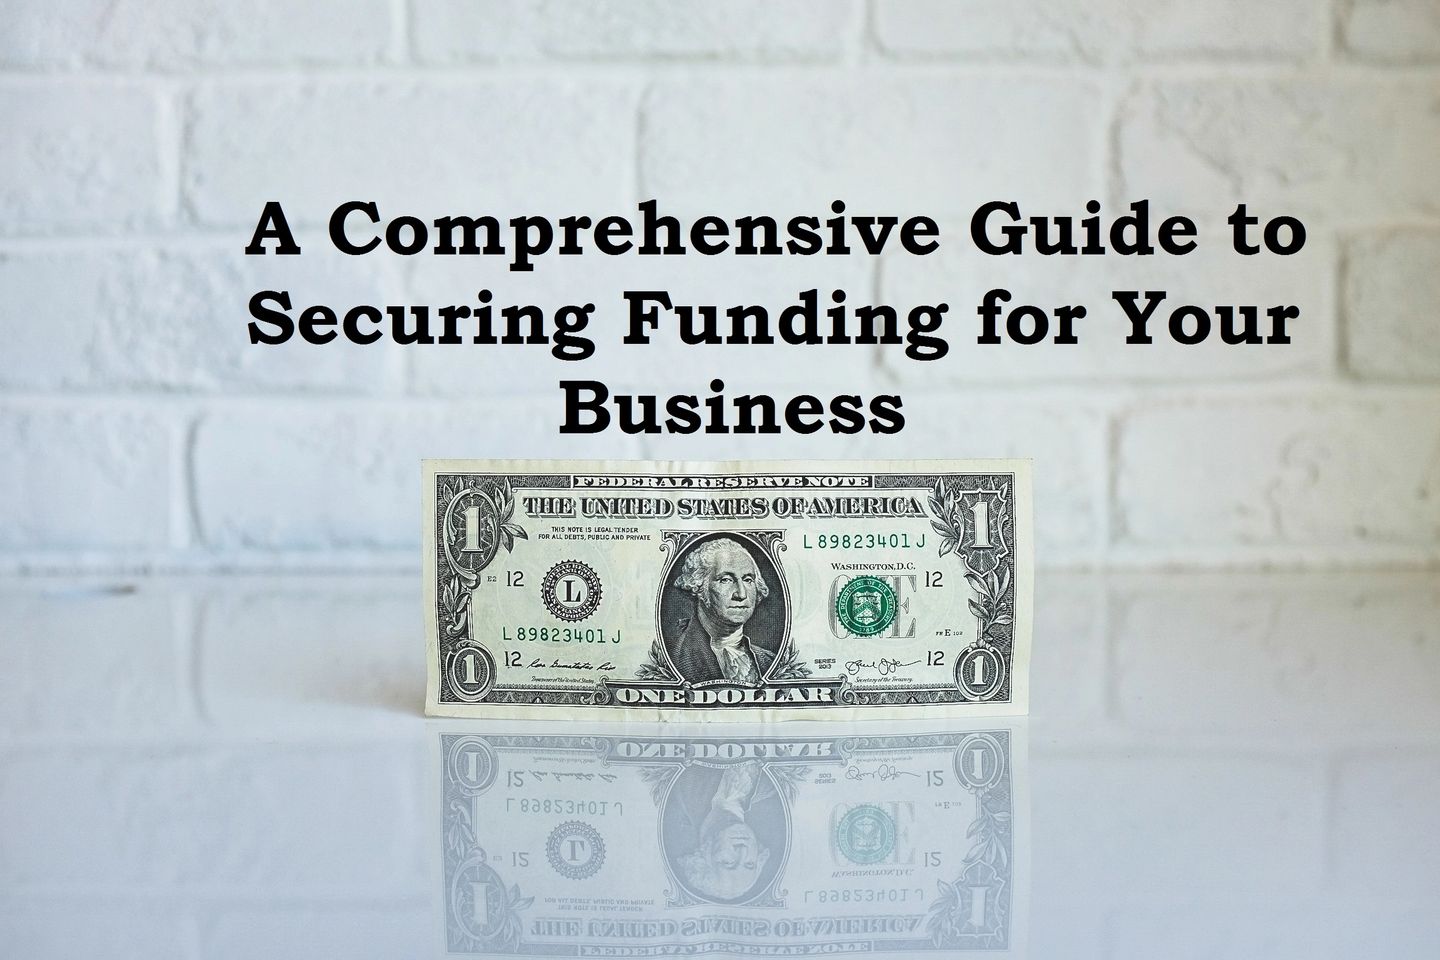  A Comprehensive Guide to Securing Funding for Your Business